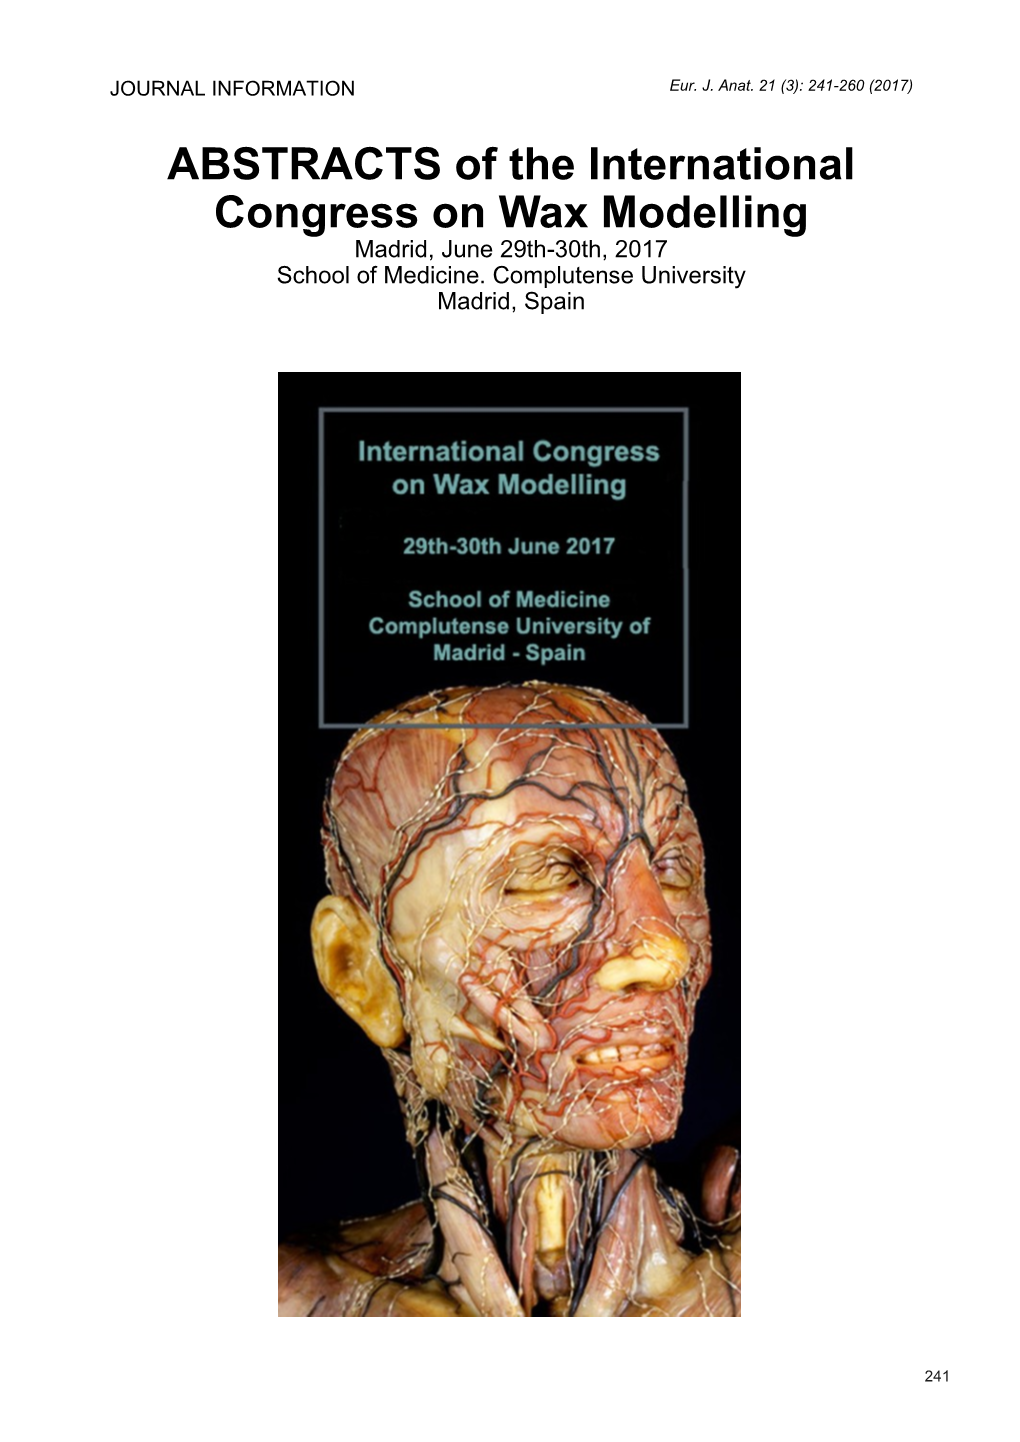 ABSTRACTS of the International Congress on Wax Modelling Madrid, June 29Th-30Th, 2017 School of Medicine